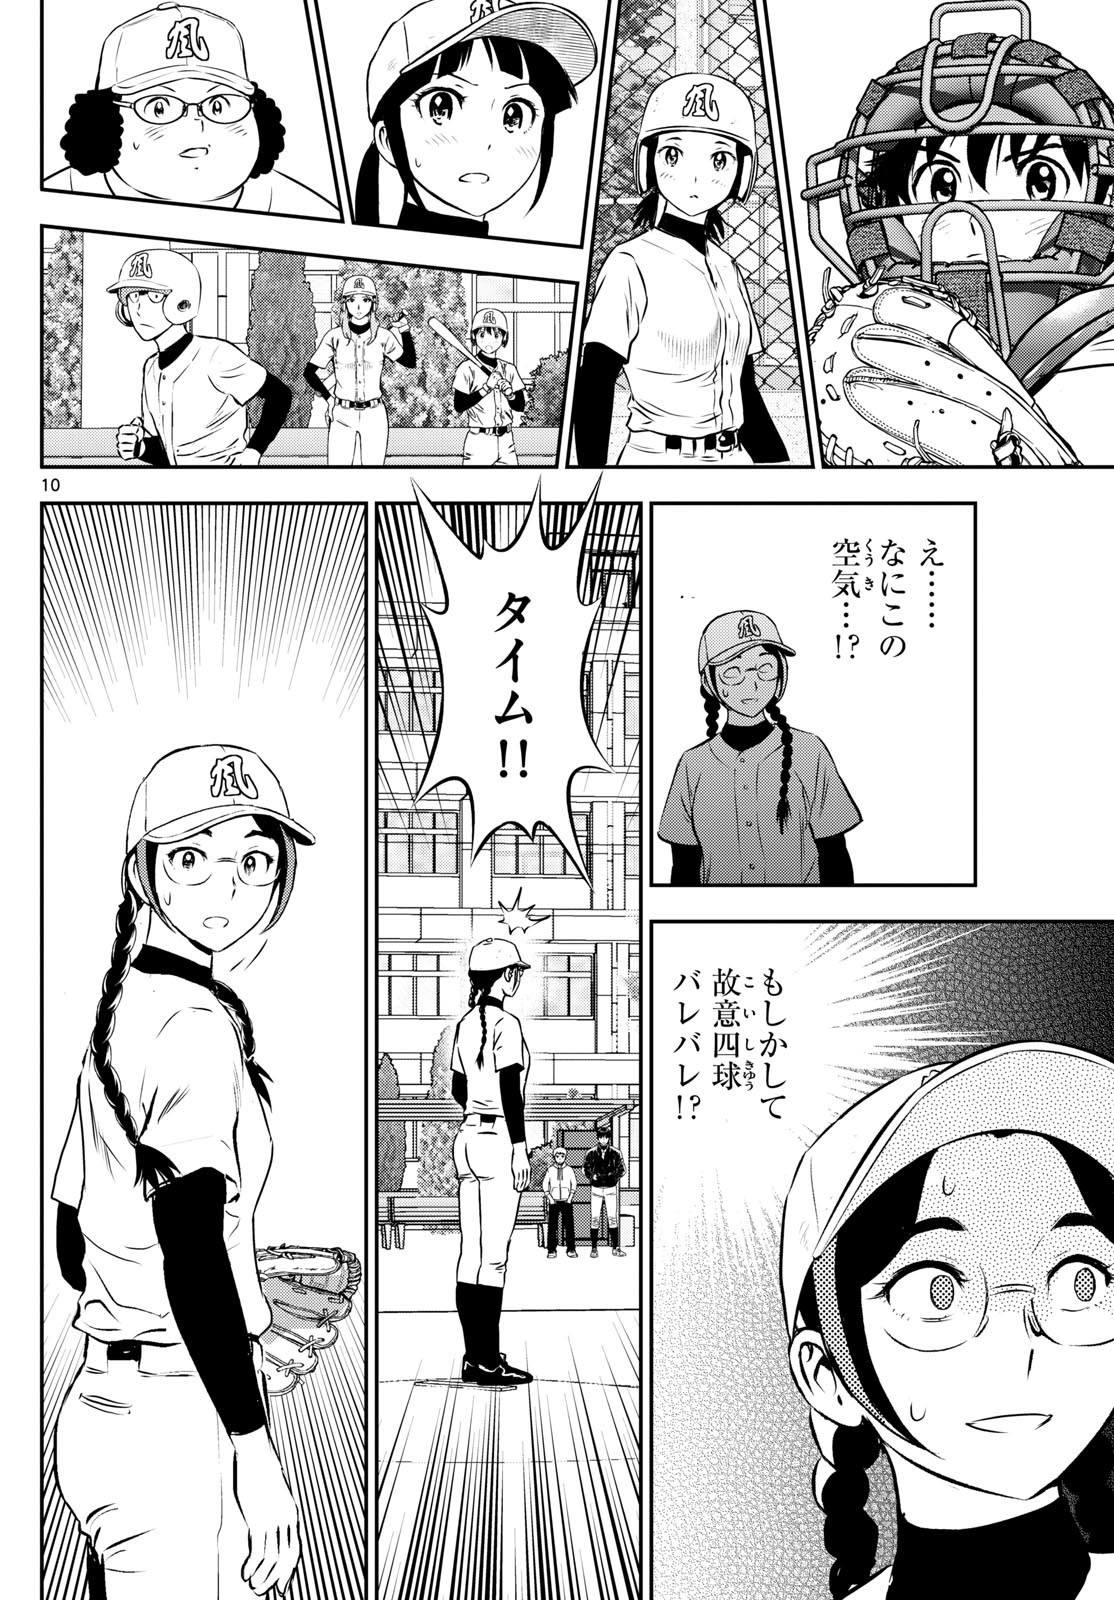 Major 2nd - メジャーセカンド - Chapter 282 - Page 10